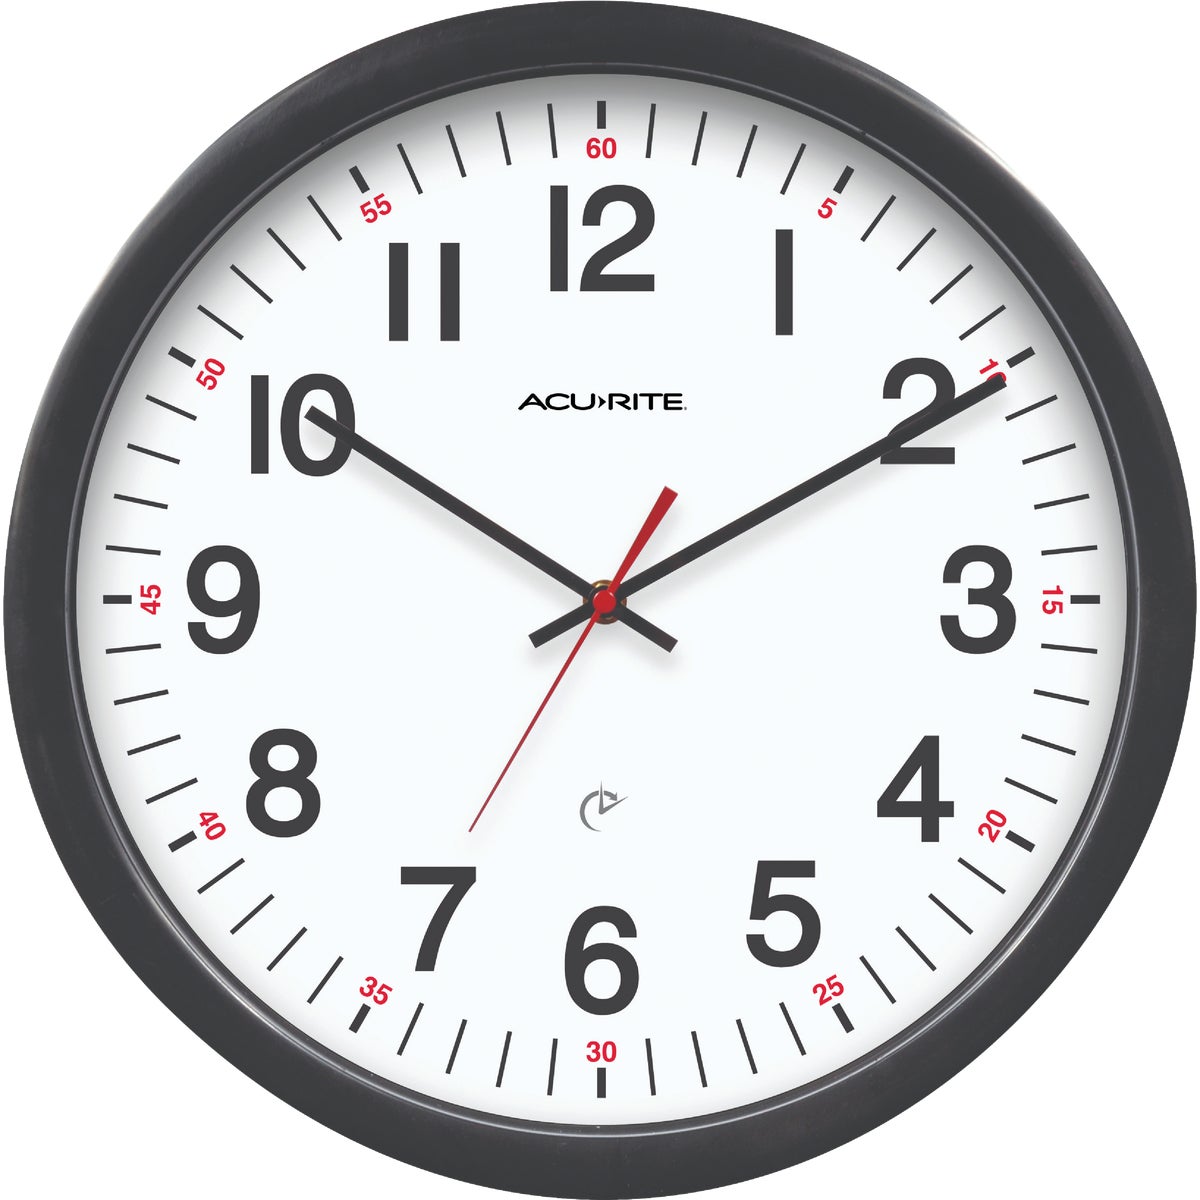 Item 650039, 14-1/2 In. Set &amp; Forget AcuRite office wall clock.